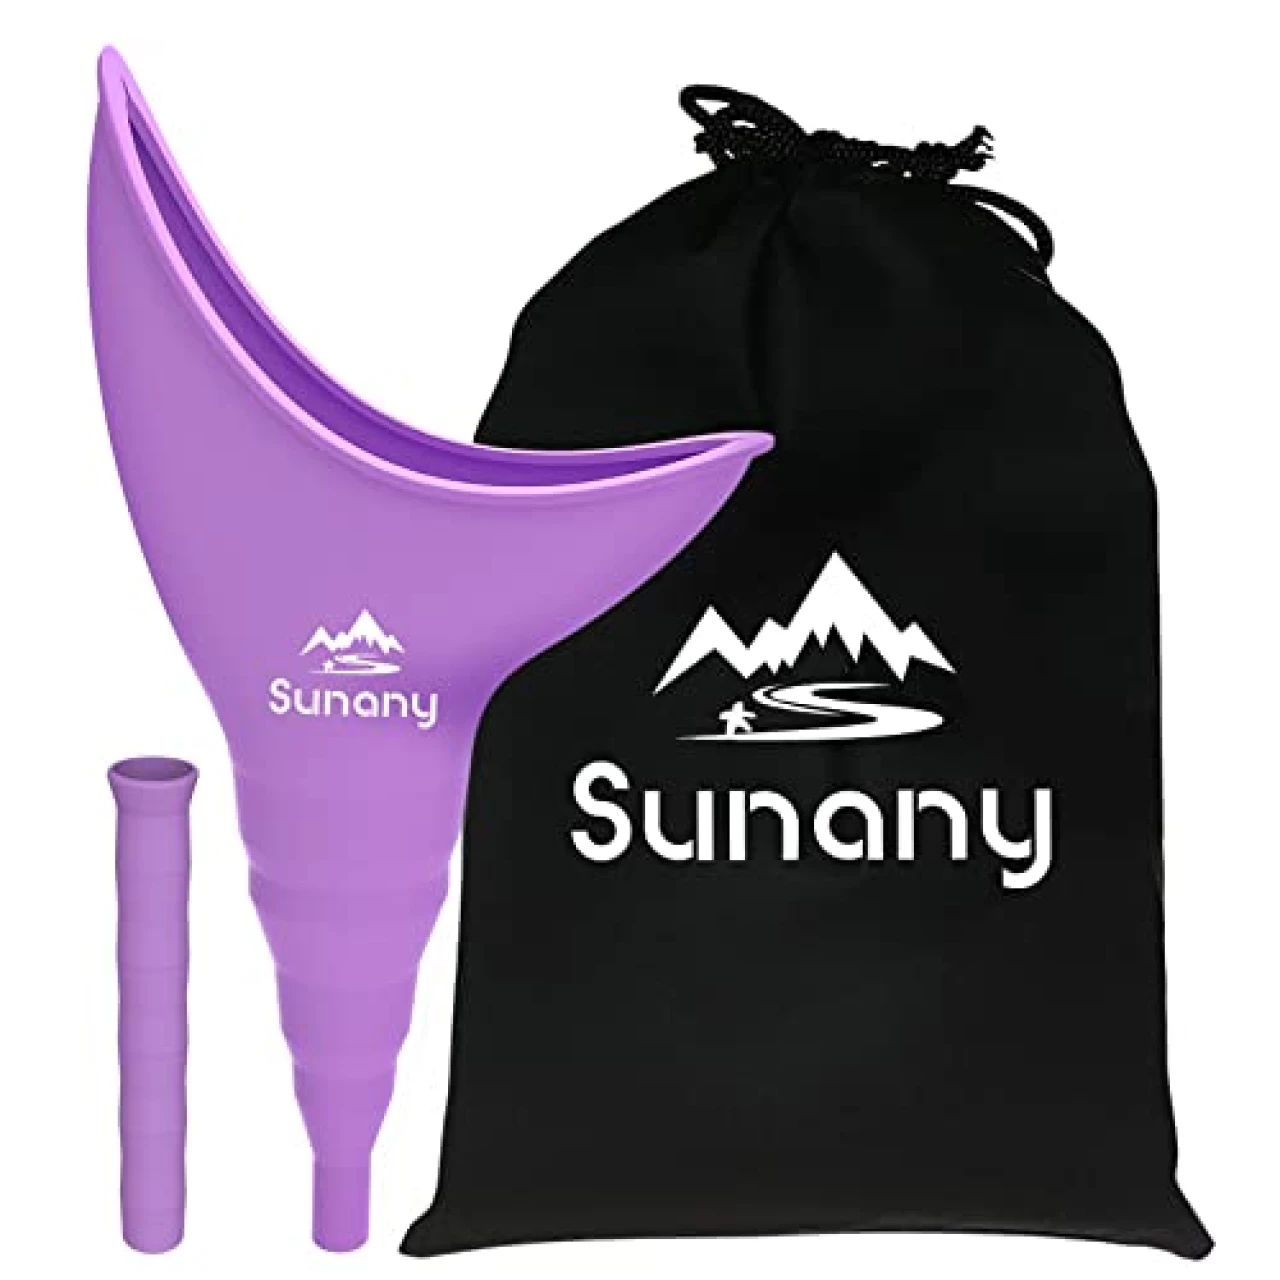 Female Urination Device,Reusable Silicone Female Urinal Foolproof Women Pee Funnel Allows Women to Pee Standing Up,Women&rsquo;s Urinal is The Perfect Companion for Travel and Outdoor (Purple)